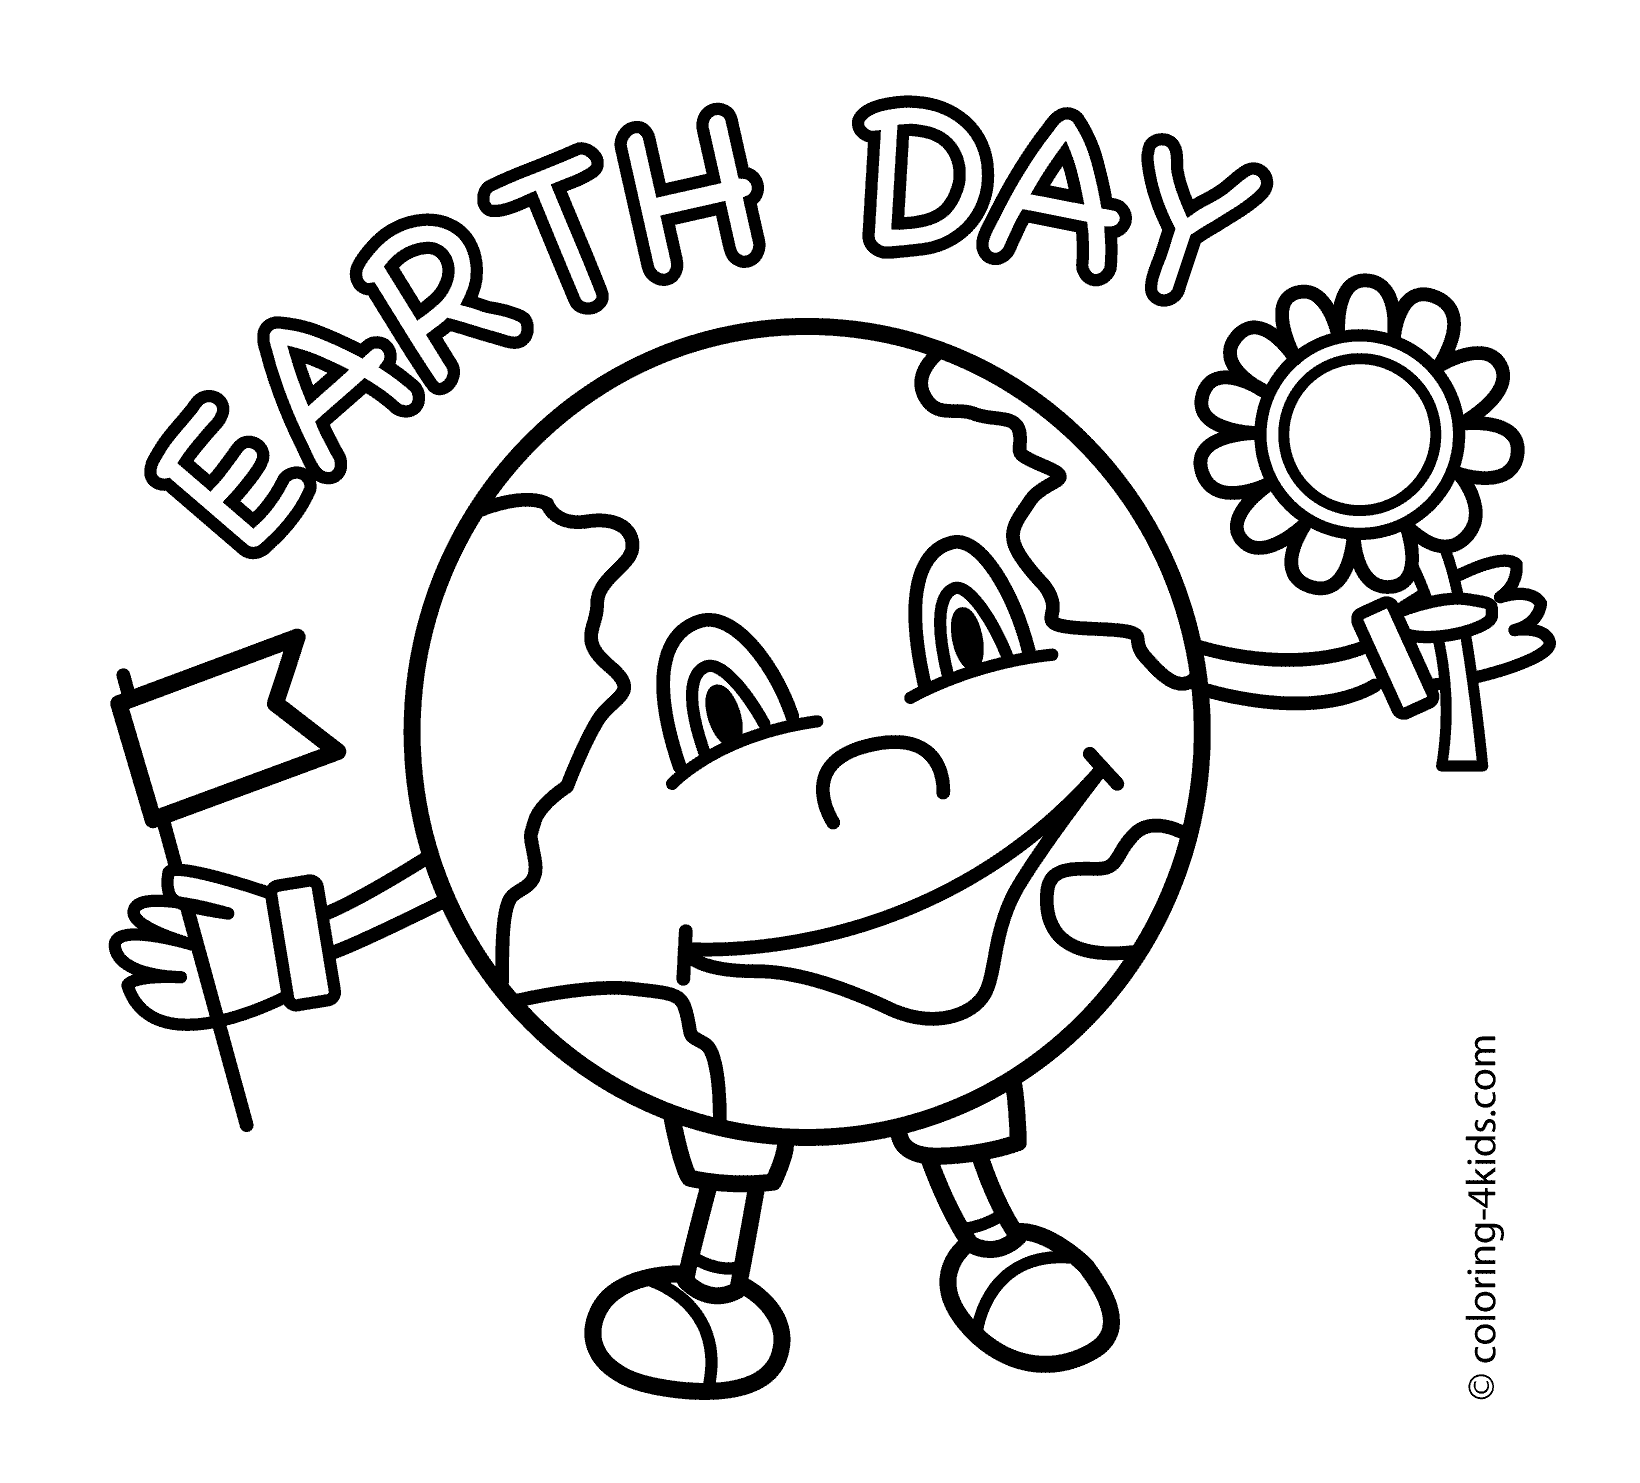 kindergarten-earth-day-coloring-pages-download-and-print-for-free